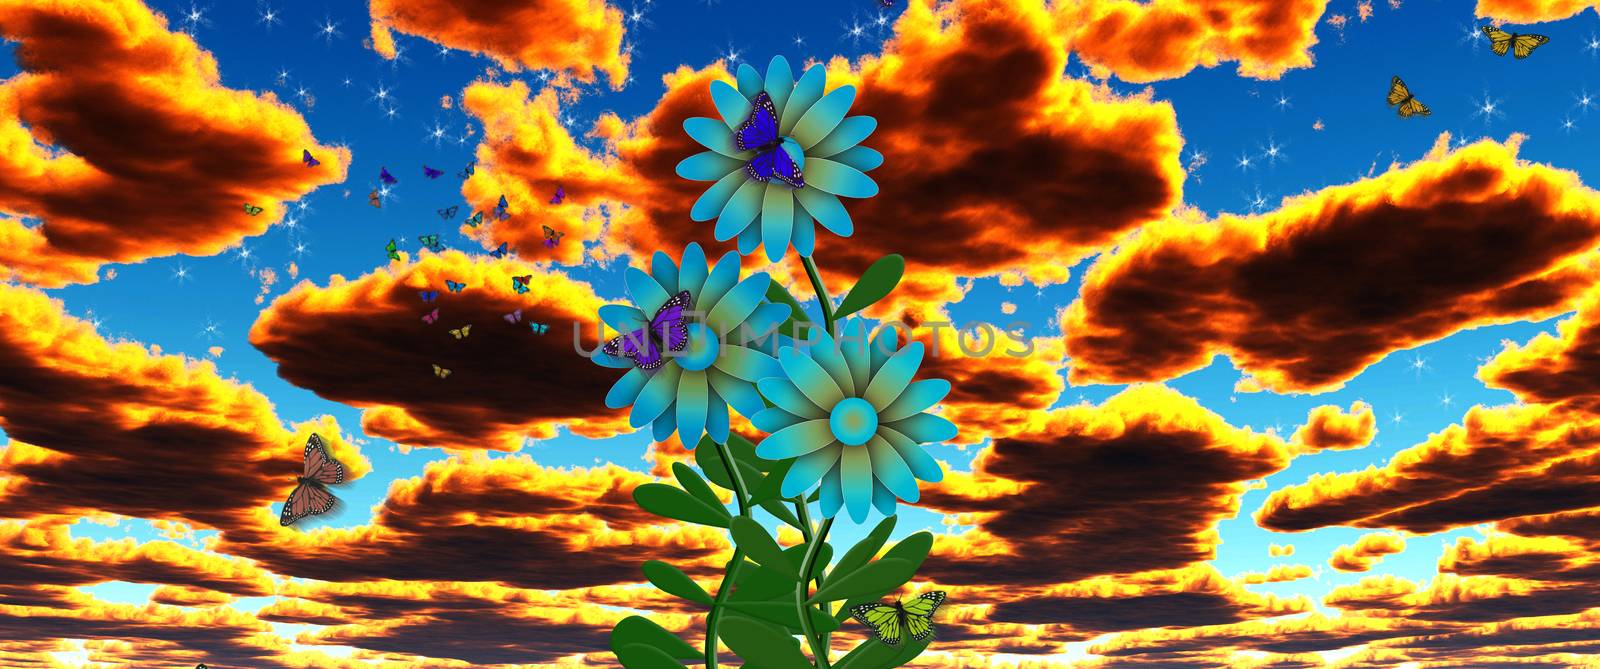 Butterflies on blue flowers. Surreal yellow clouds in the sky. 3D rendering